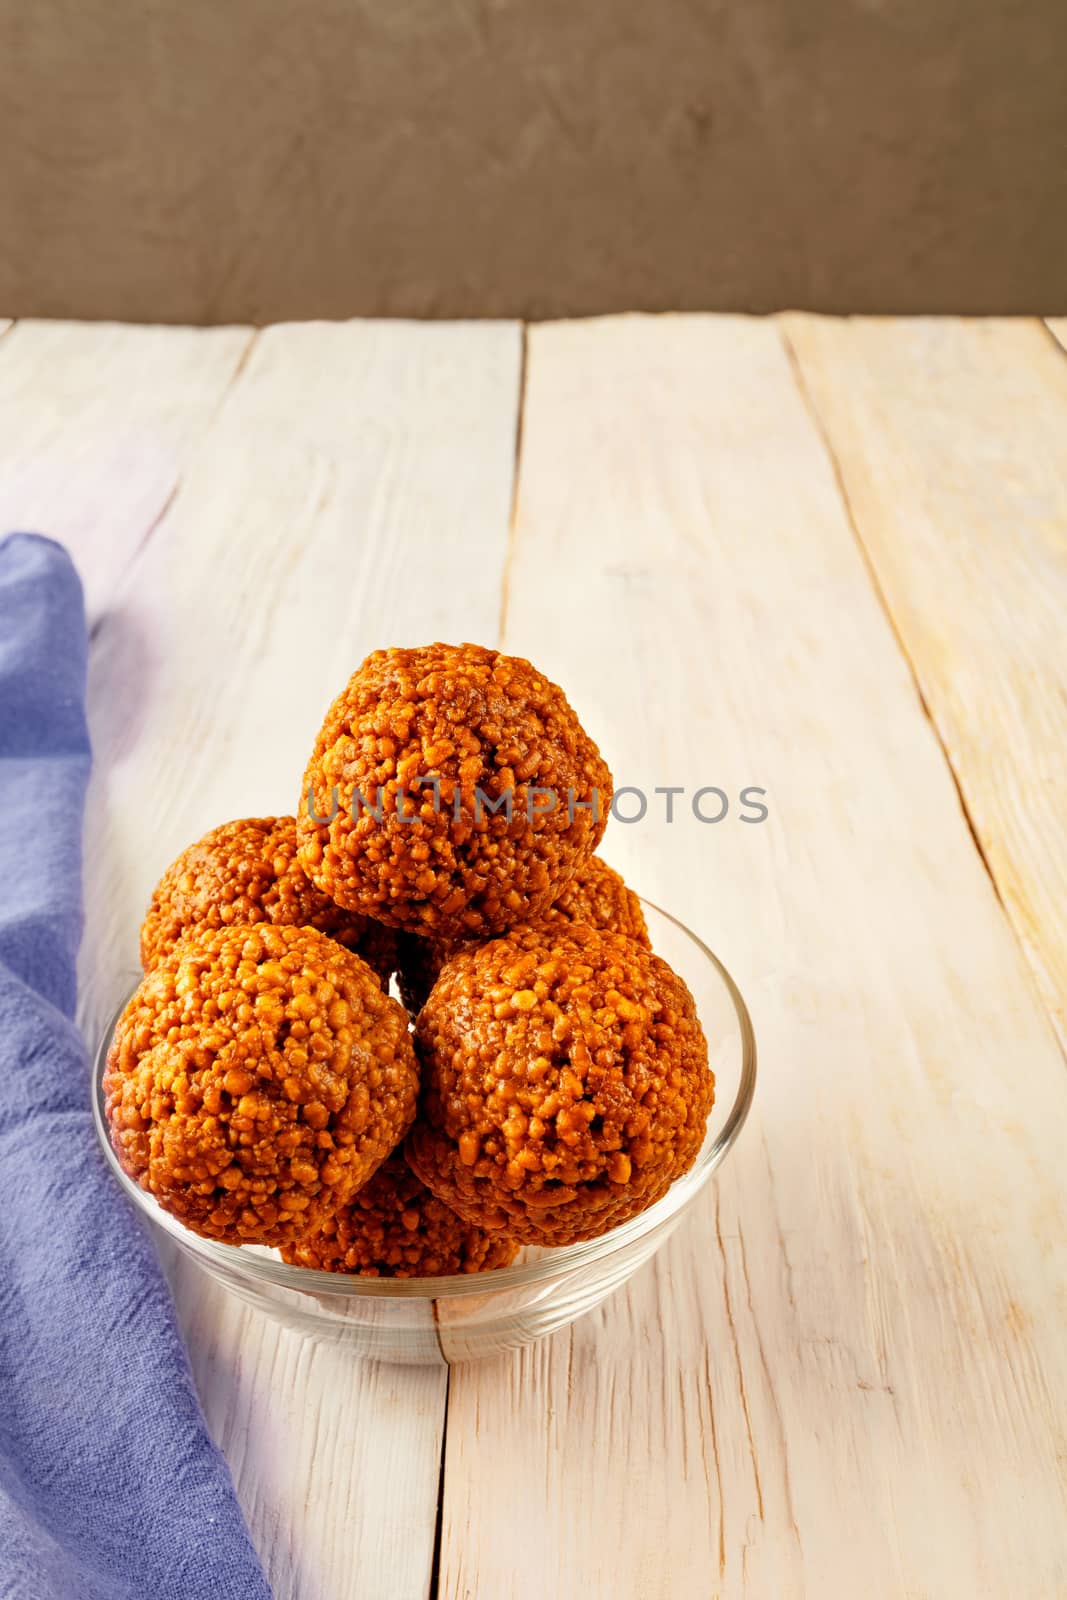 Homemade energy balls with different healthy ingredients, walnuts and honey in a glass bowl on a light wooden surface. by Sergii